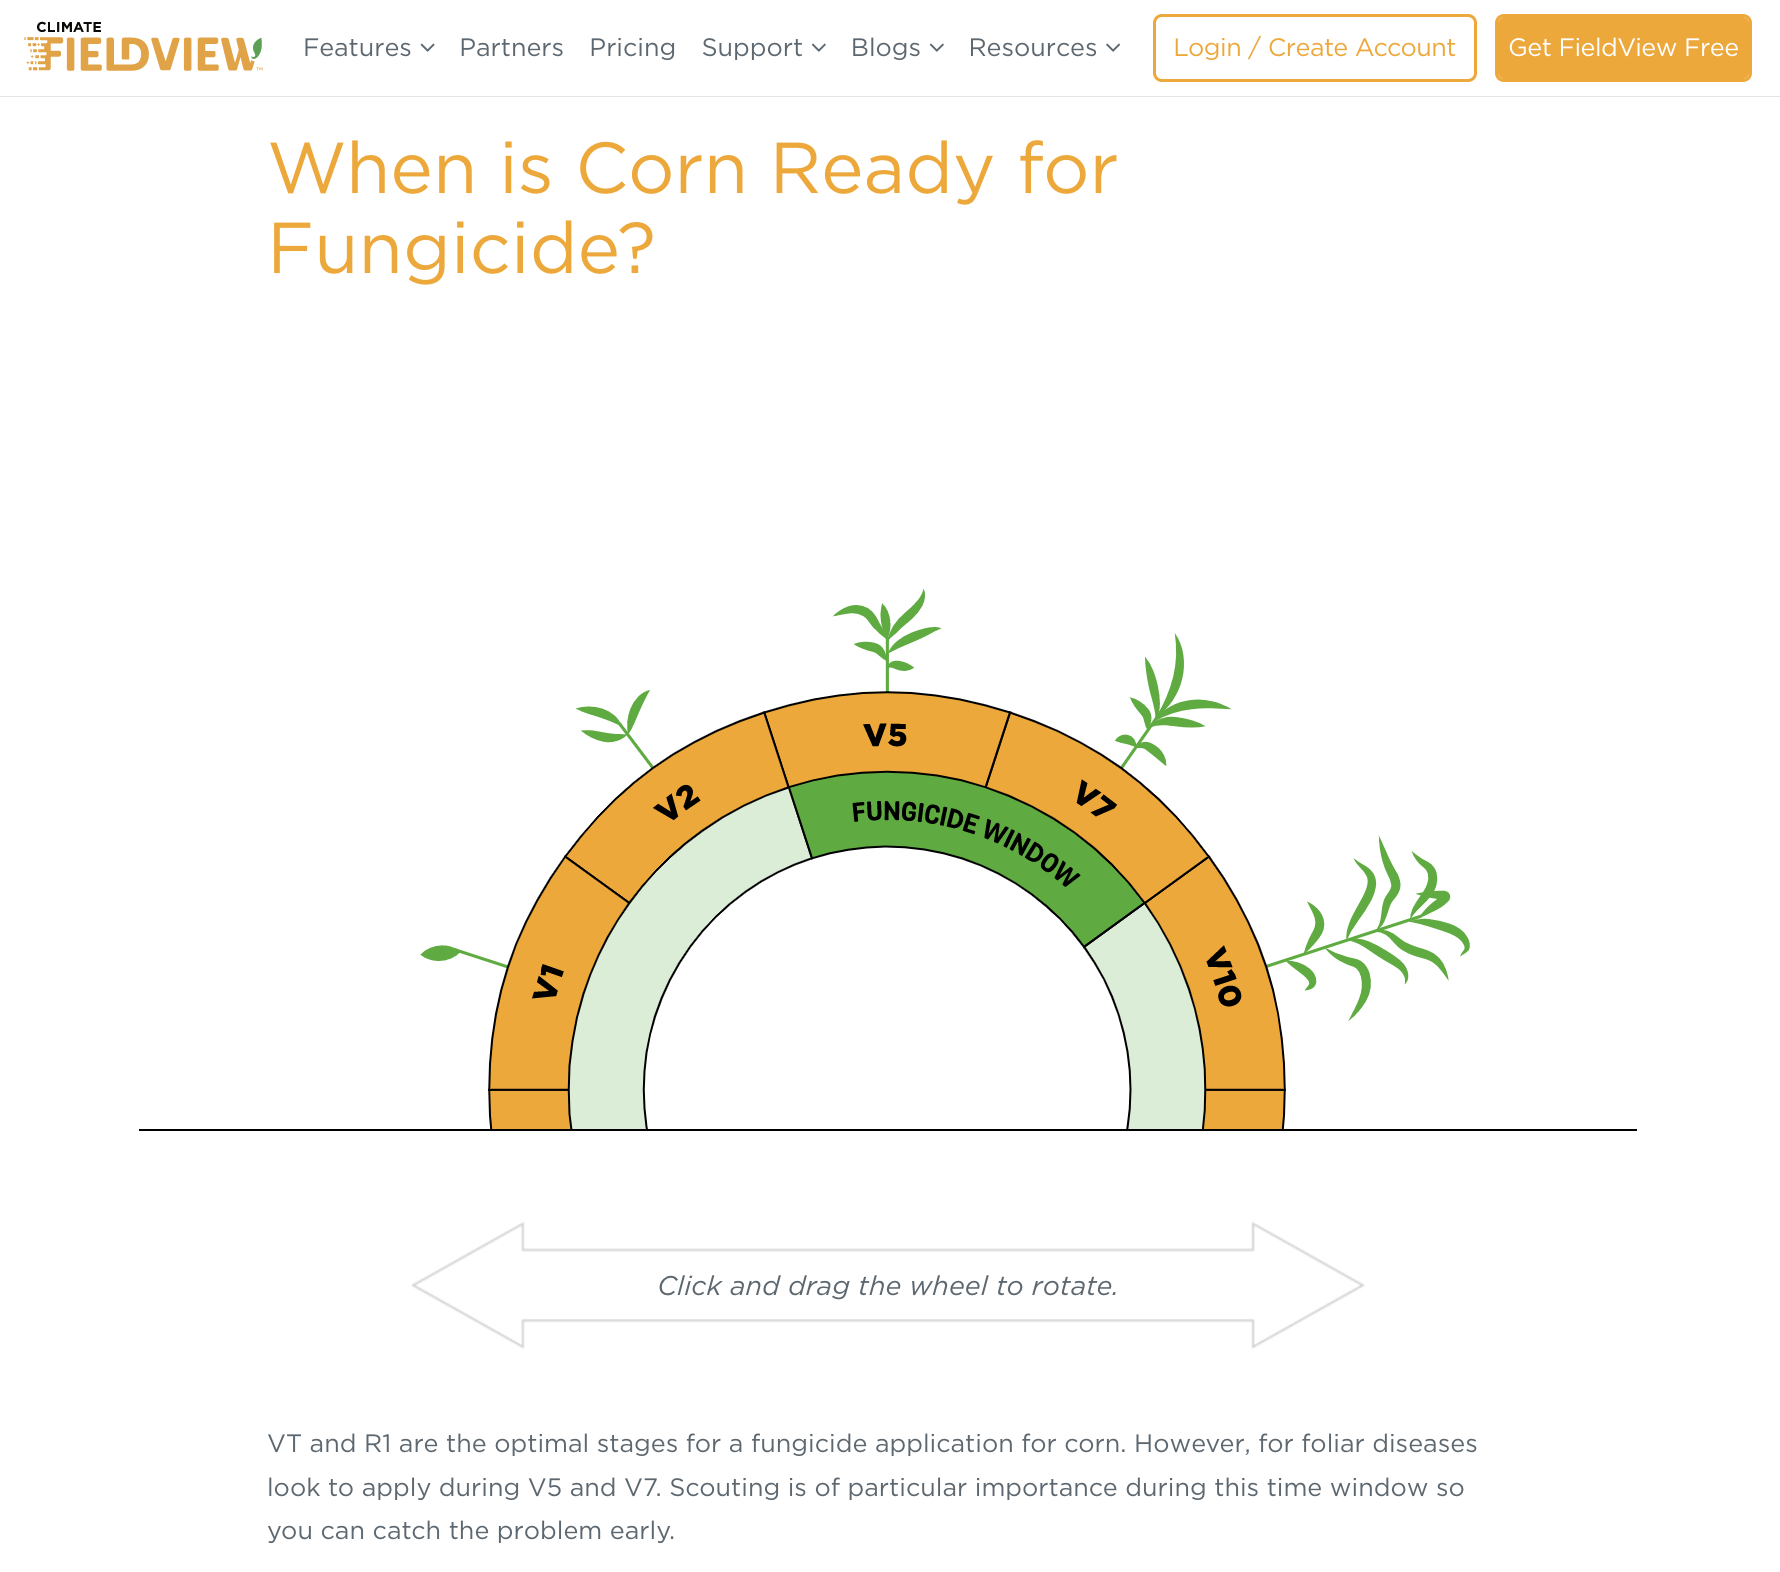 Fieldview’s Fungicide page depicts a cartoon rendering of an orange and green semi-circle against a white background. There is a series of progressively taller, cartoon corn plants growing out of the top of the semi-circle with measurements for the “Fungicide Window” (V1-V10). There is a double arrow with the words “Click and drag the wheel to rotate.” inside. The page's description reads, “VT and R1 are the optimal stages for fungicide application for corn. However, foliar diseases look to apply during V5 and V7. Scouting is of particular importance during this time window so you can catch the problem early.” 